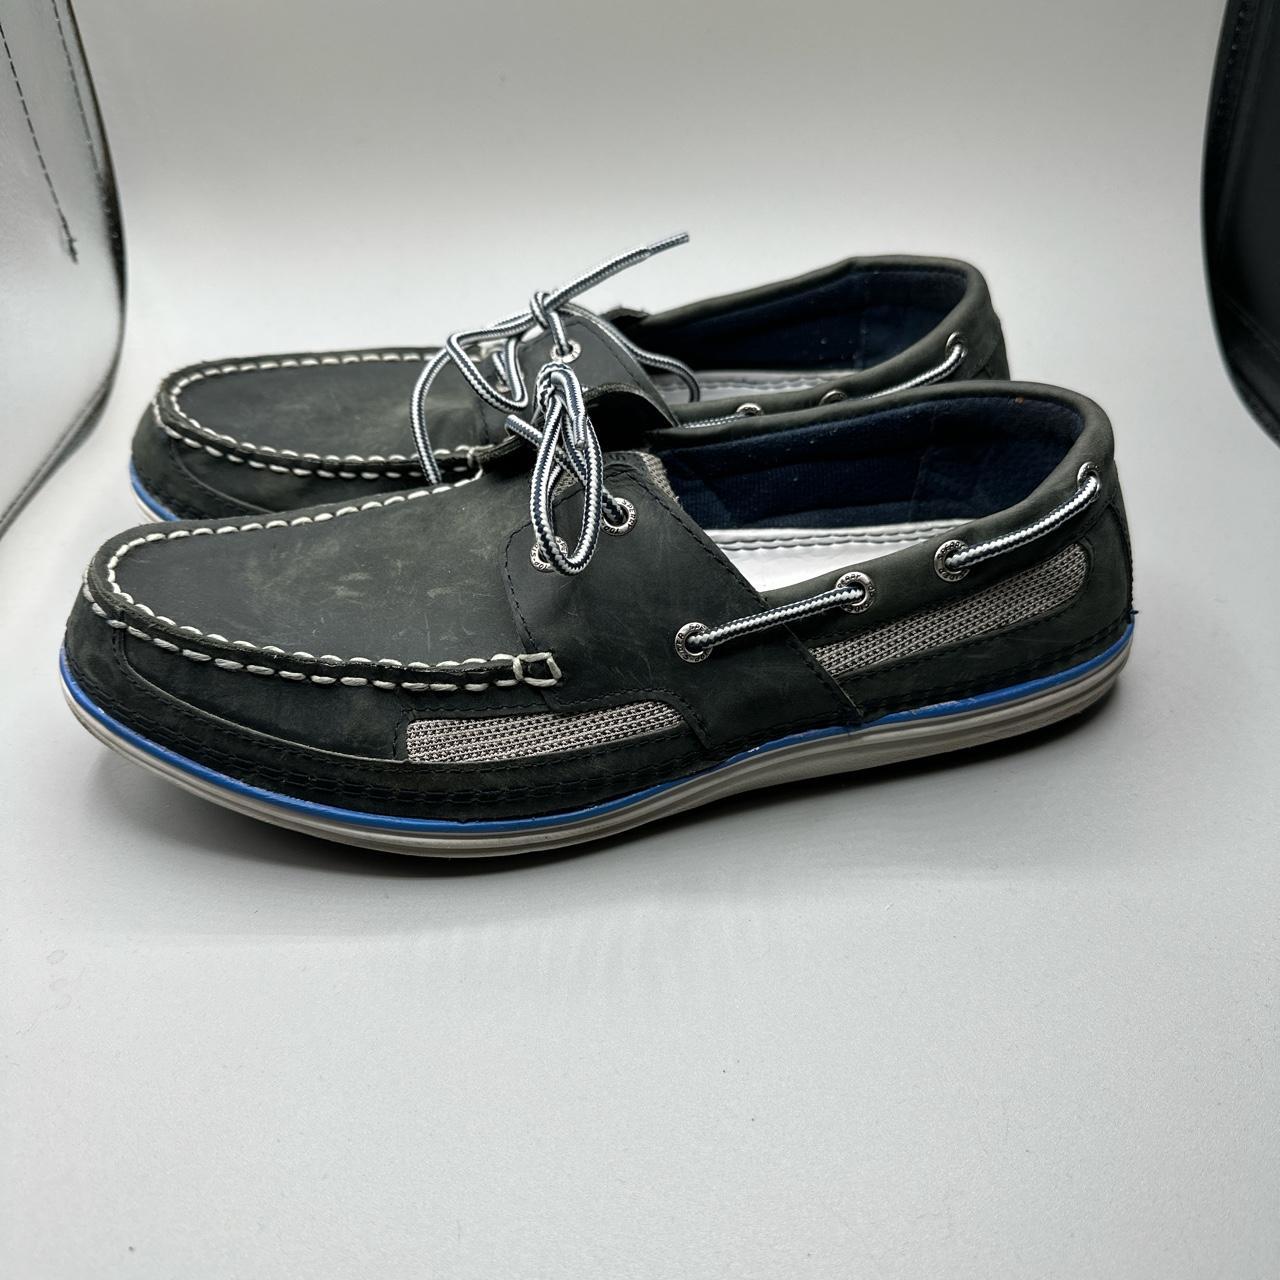 Sperry Men's Blue and Grey Boat-shoes | Depop